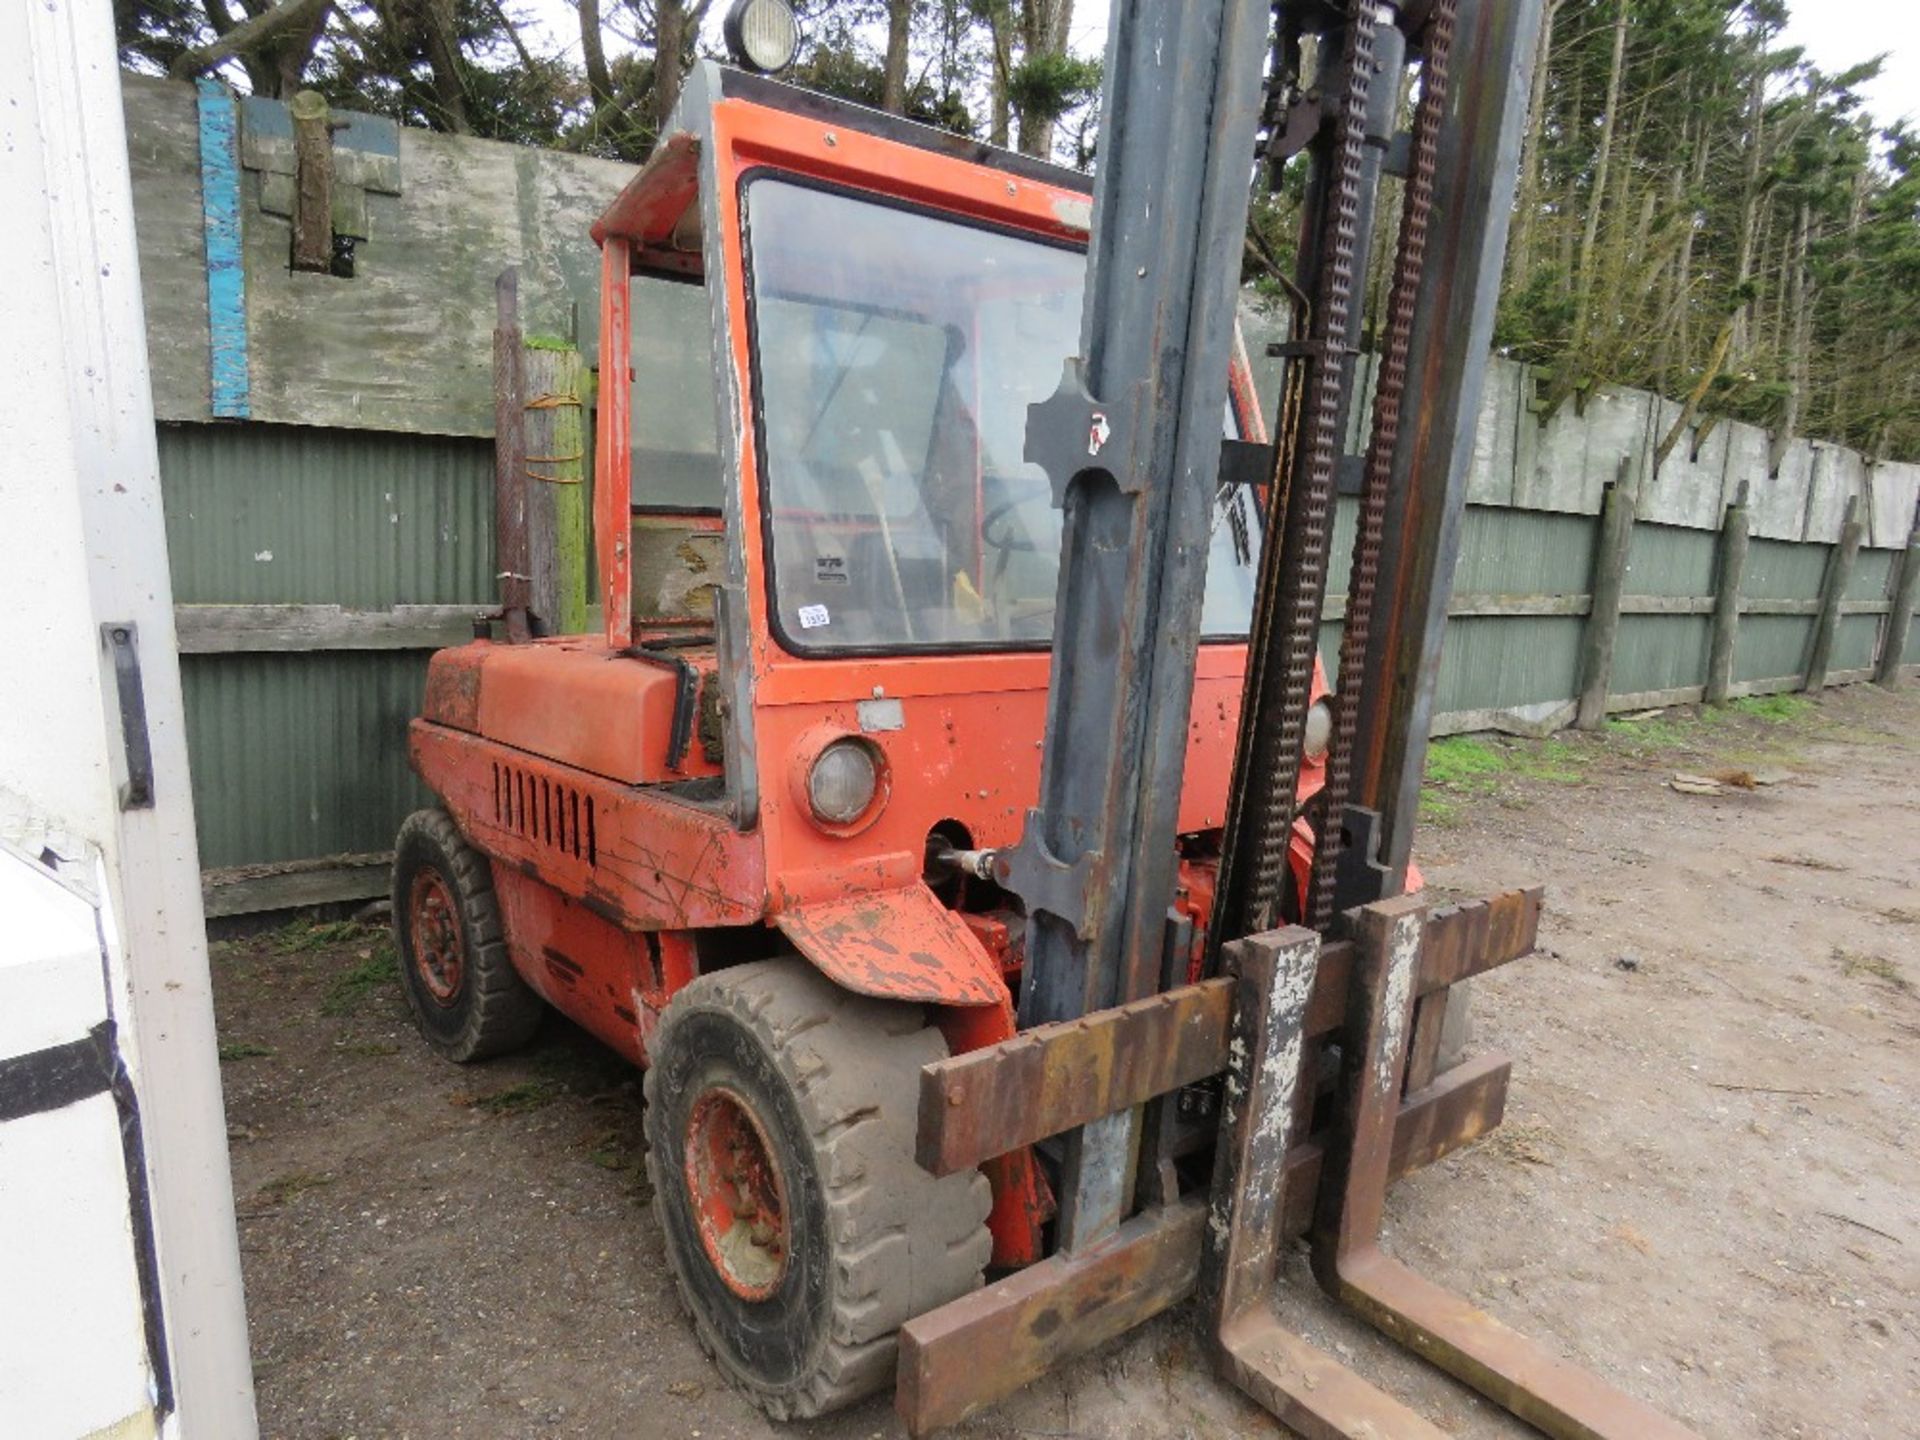 LINDE 6 TONNE DIESEL ENGINED FORKLIFT TRUCK WITH 7FT TINES FITTED. WHEN TESTED WAS SEEN TO RUN, DRIV - Image 3 of 12